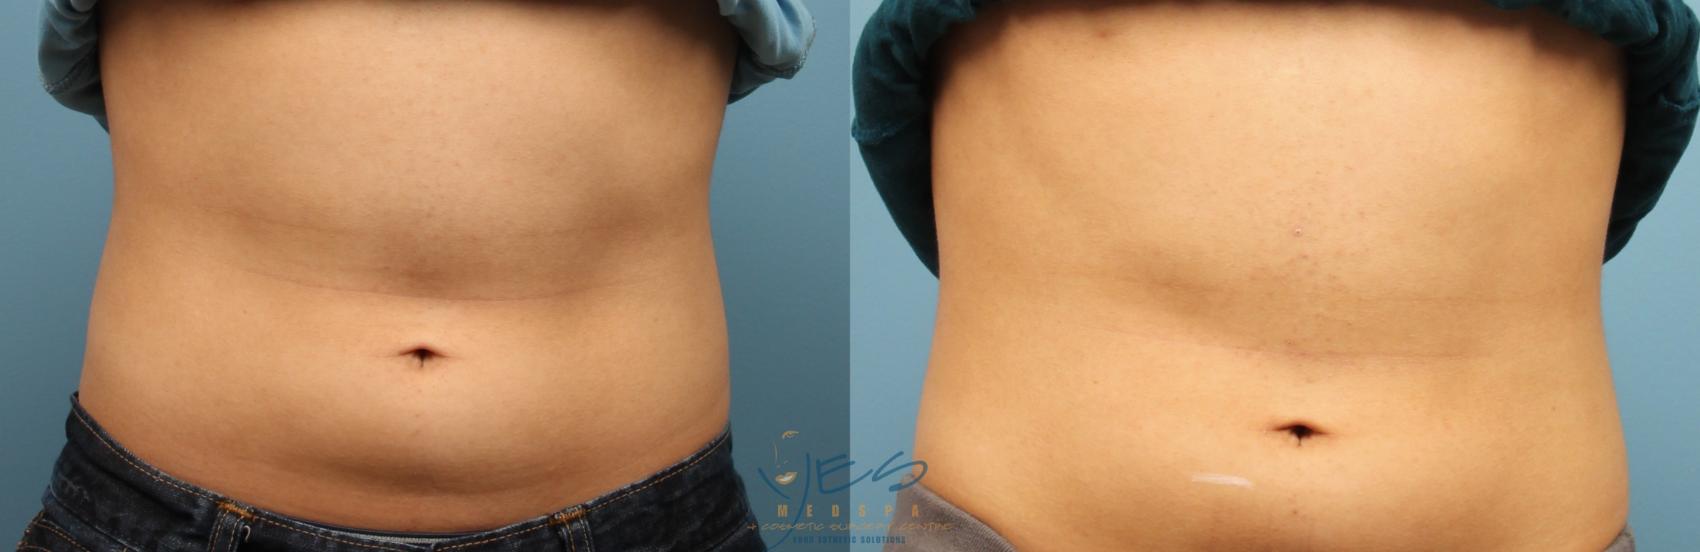 Before & After Evolve Tite / Venus BodyFx Case 225 Front View in Vancouver, BC